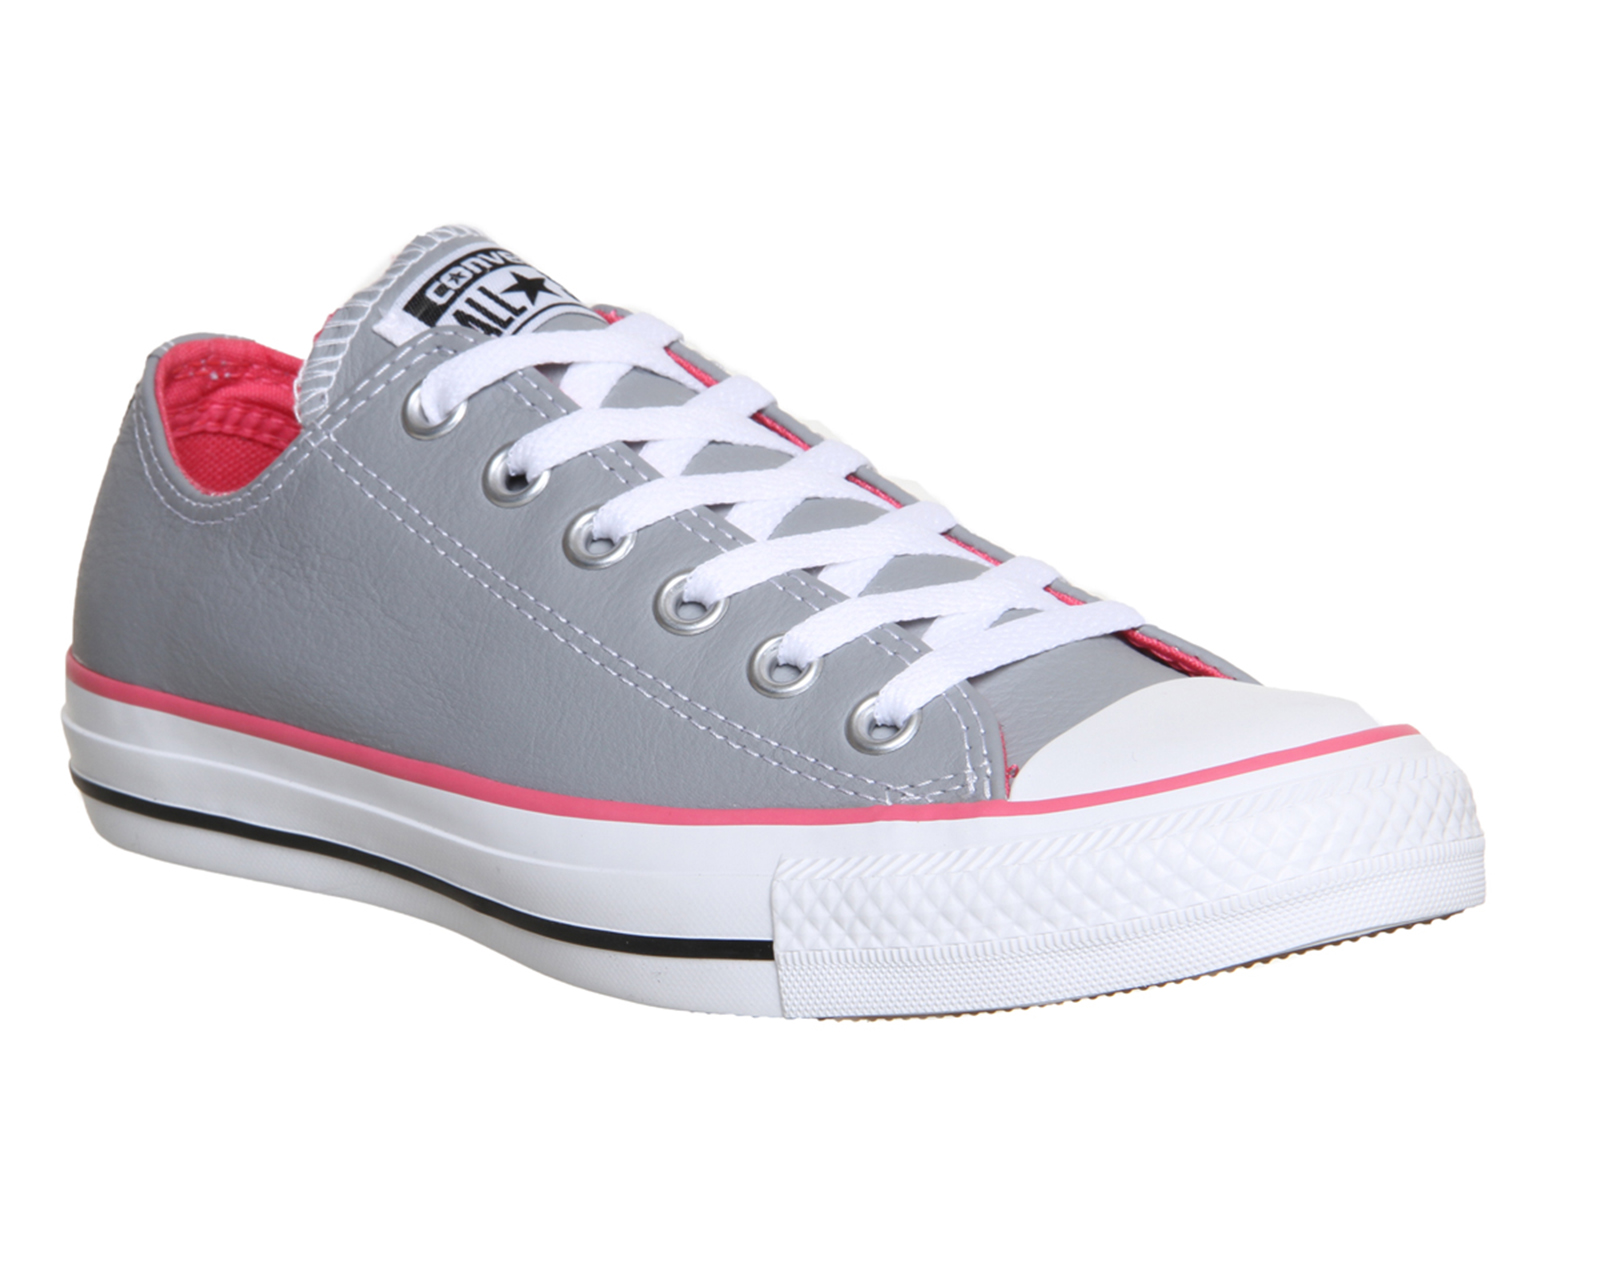 Converse All Star Low Leather Grey Pink 